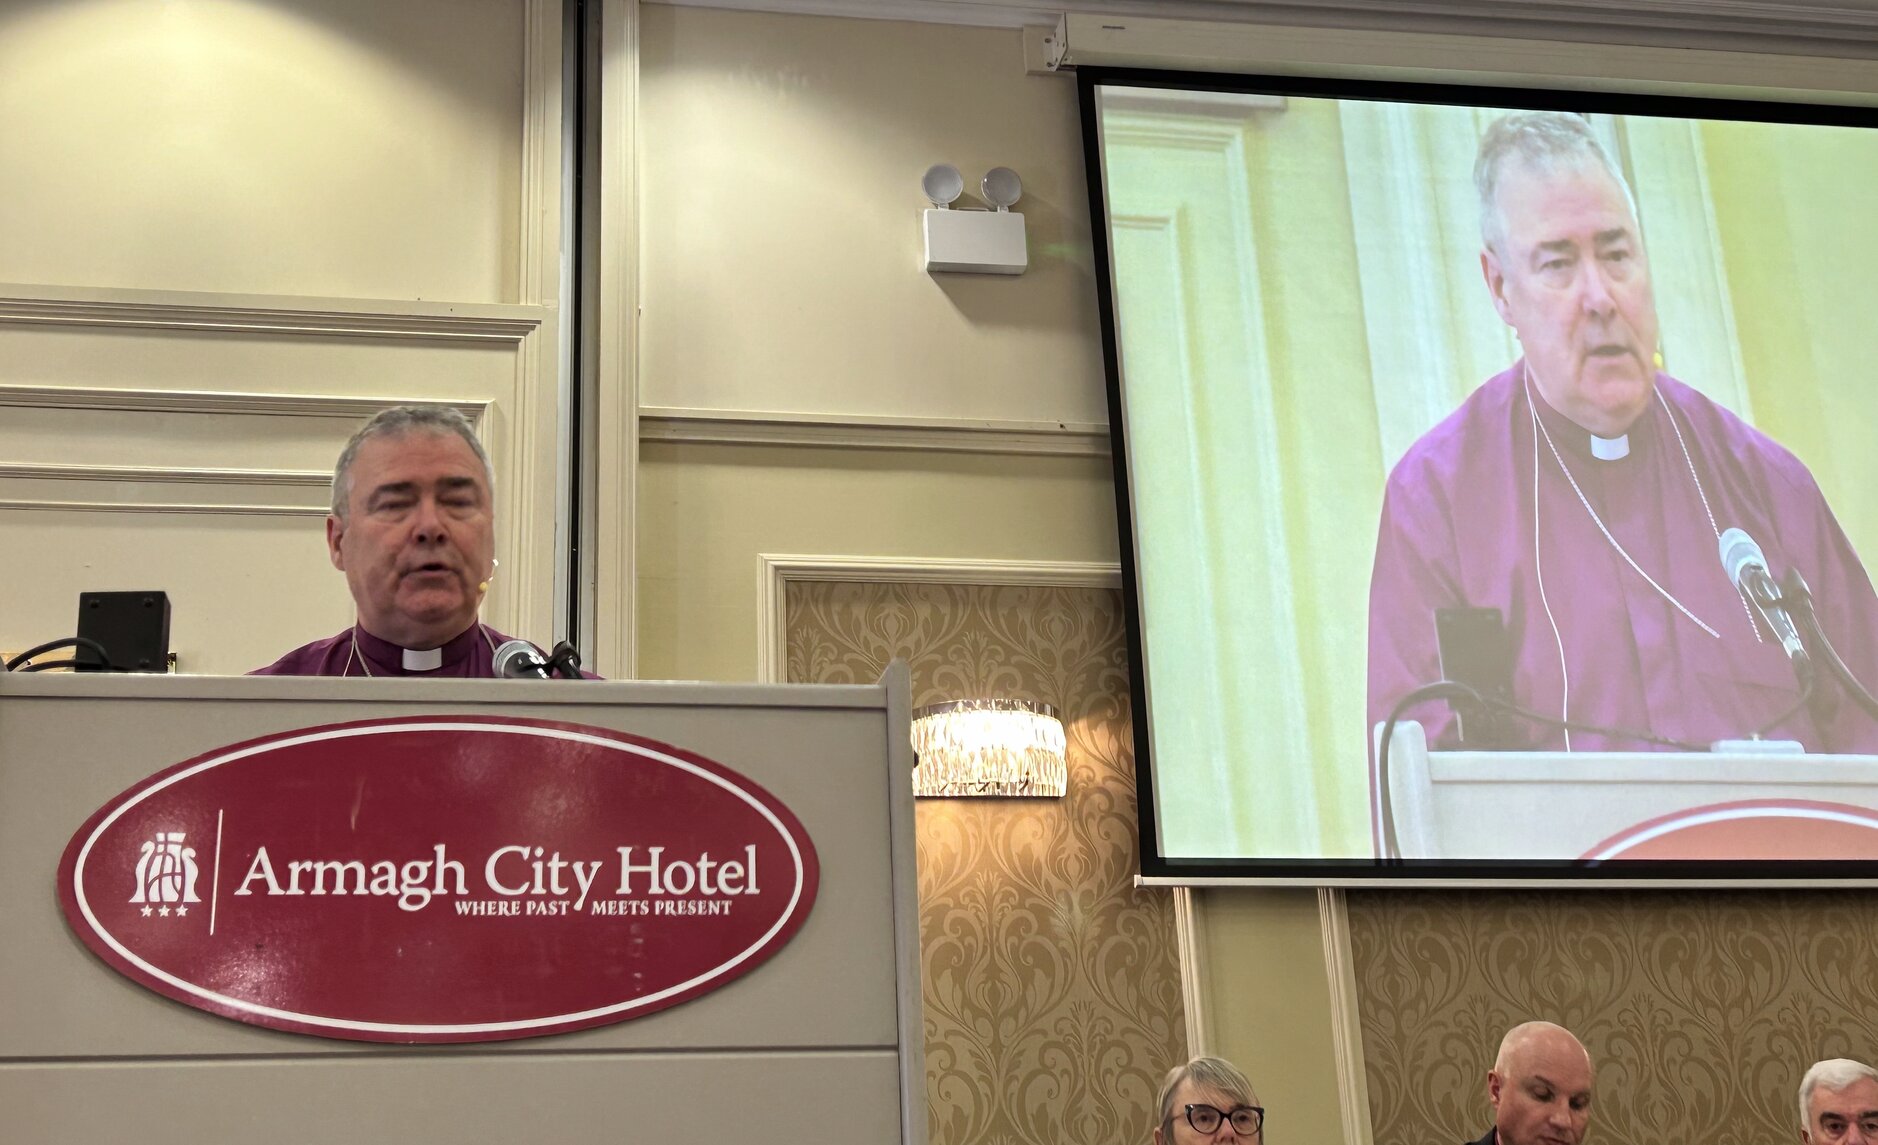 General Synod 2024 Opens – Presidential Address Focuses on Christian Citizenship and Reconciliation in a Conflicted World - You can keep up with all the happenings of General Synod on the website – www.synod.ireland.anglican.org